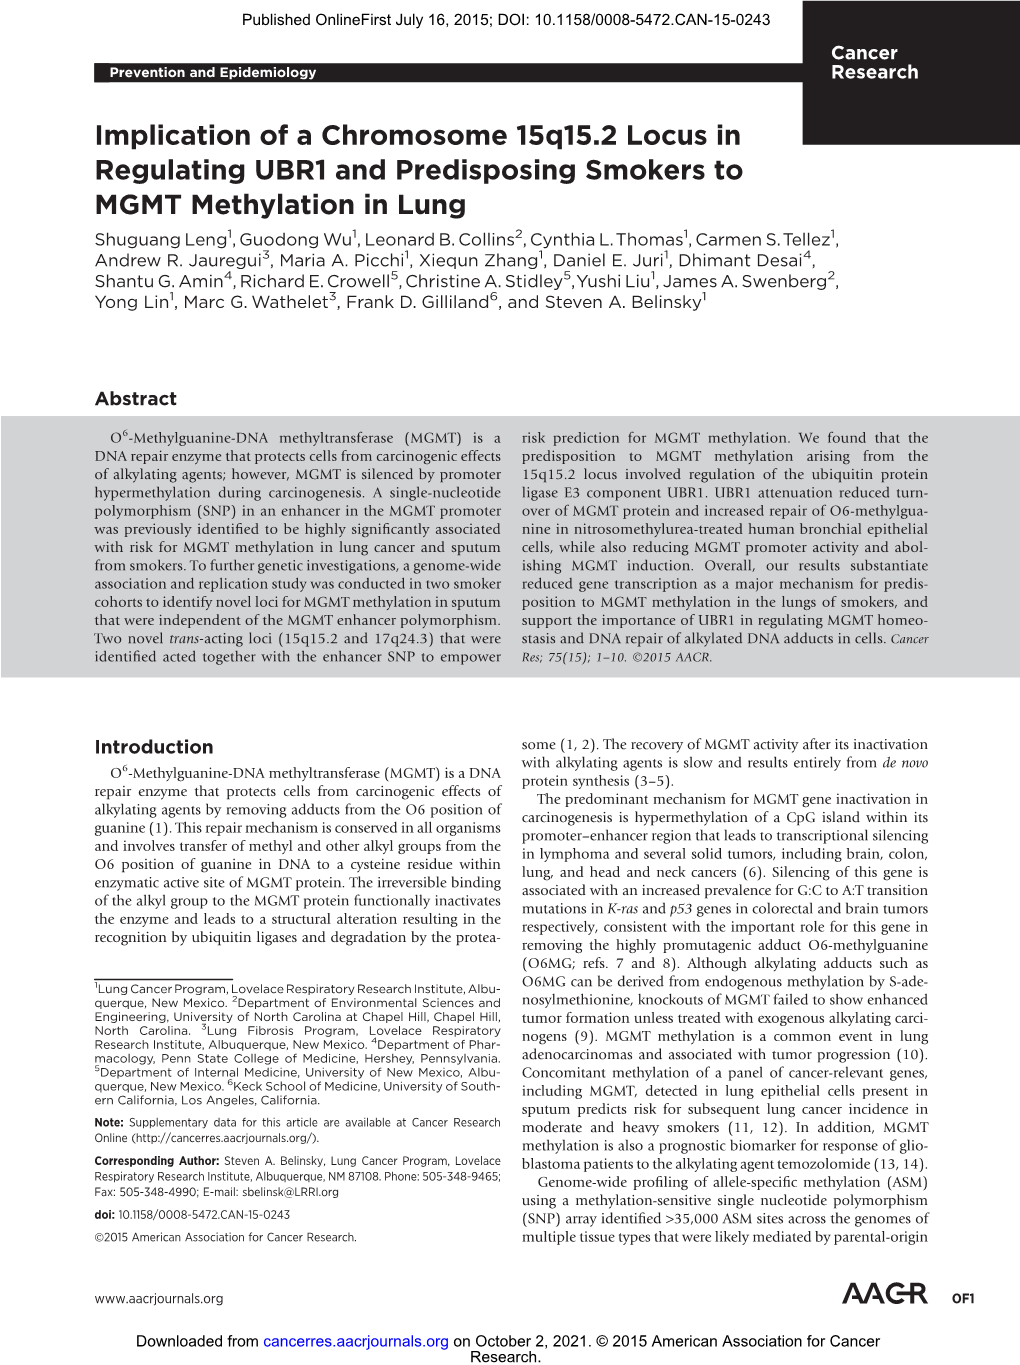 Implication of a Chromosome 15Q15.2 Locus in Regulating UBR1 and Predisposing Smokers to MGMT Methylation in Lung Shuguang Leng1, Guodong Wu1, Leonard B